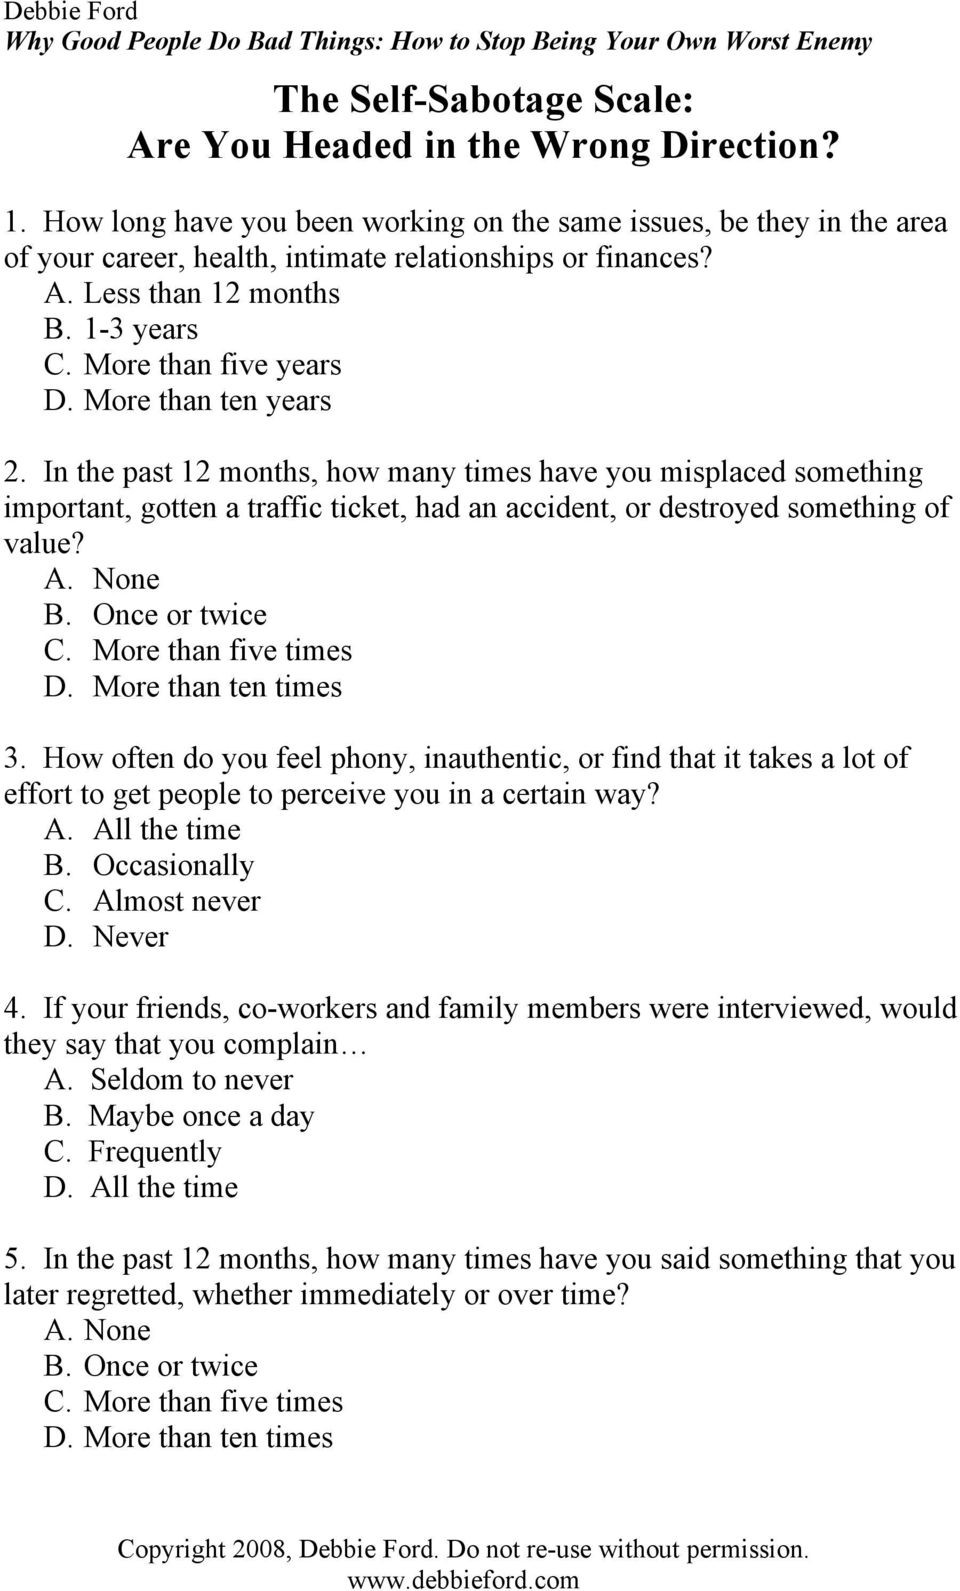 Scientific Notation Worksheet Pdf the Self Sabotage Scale are You Headed In Wrong Direction